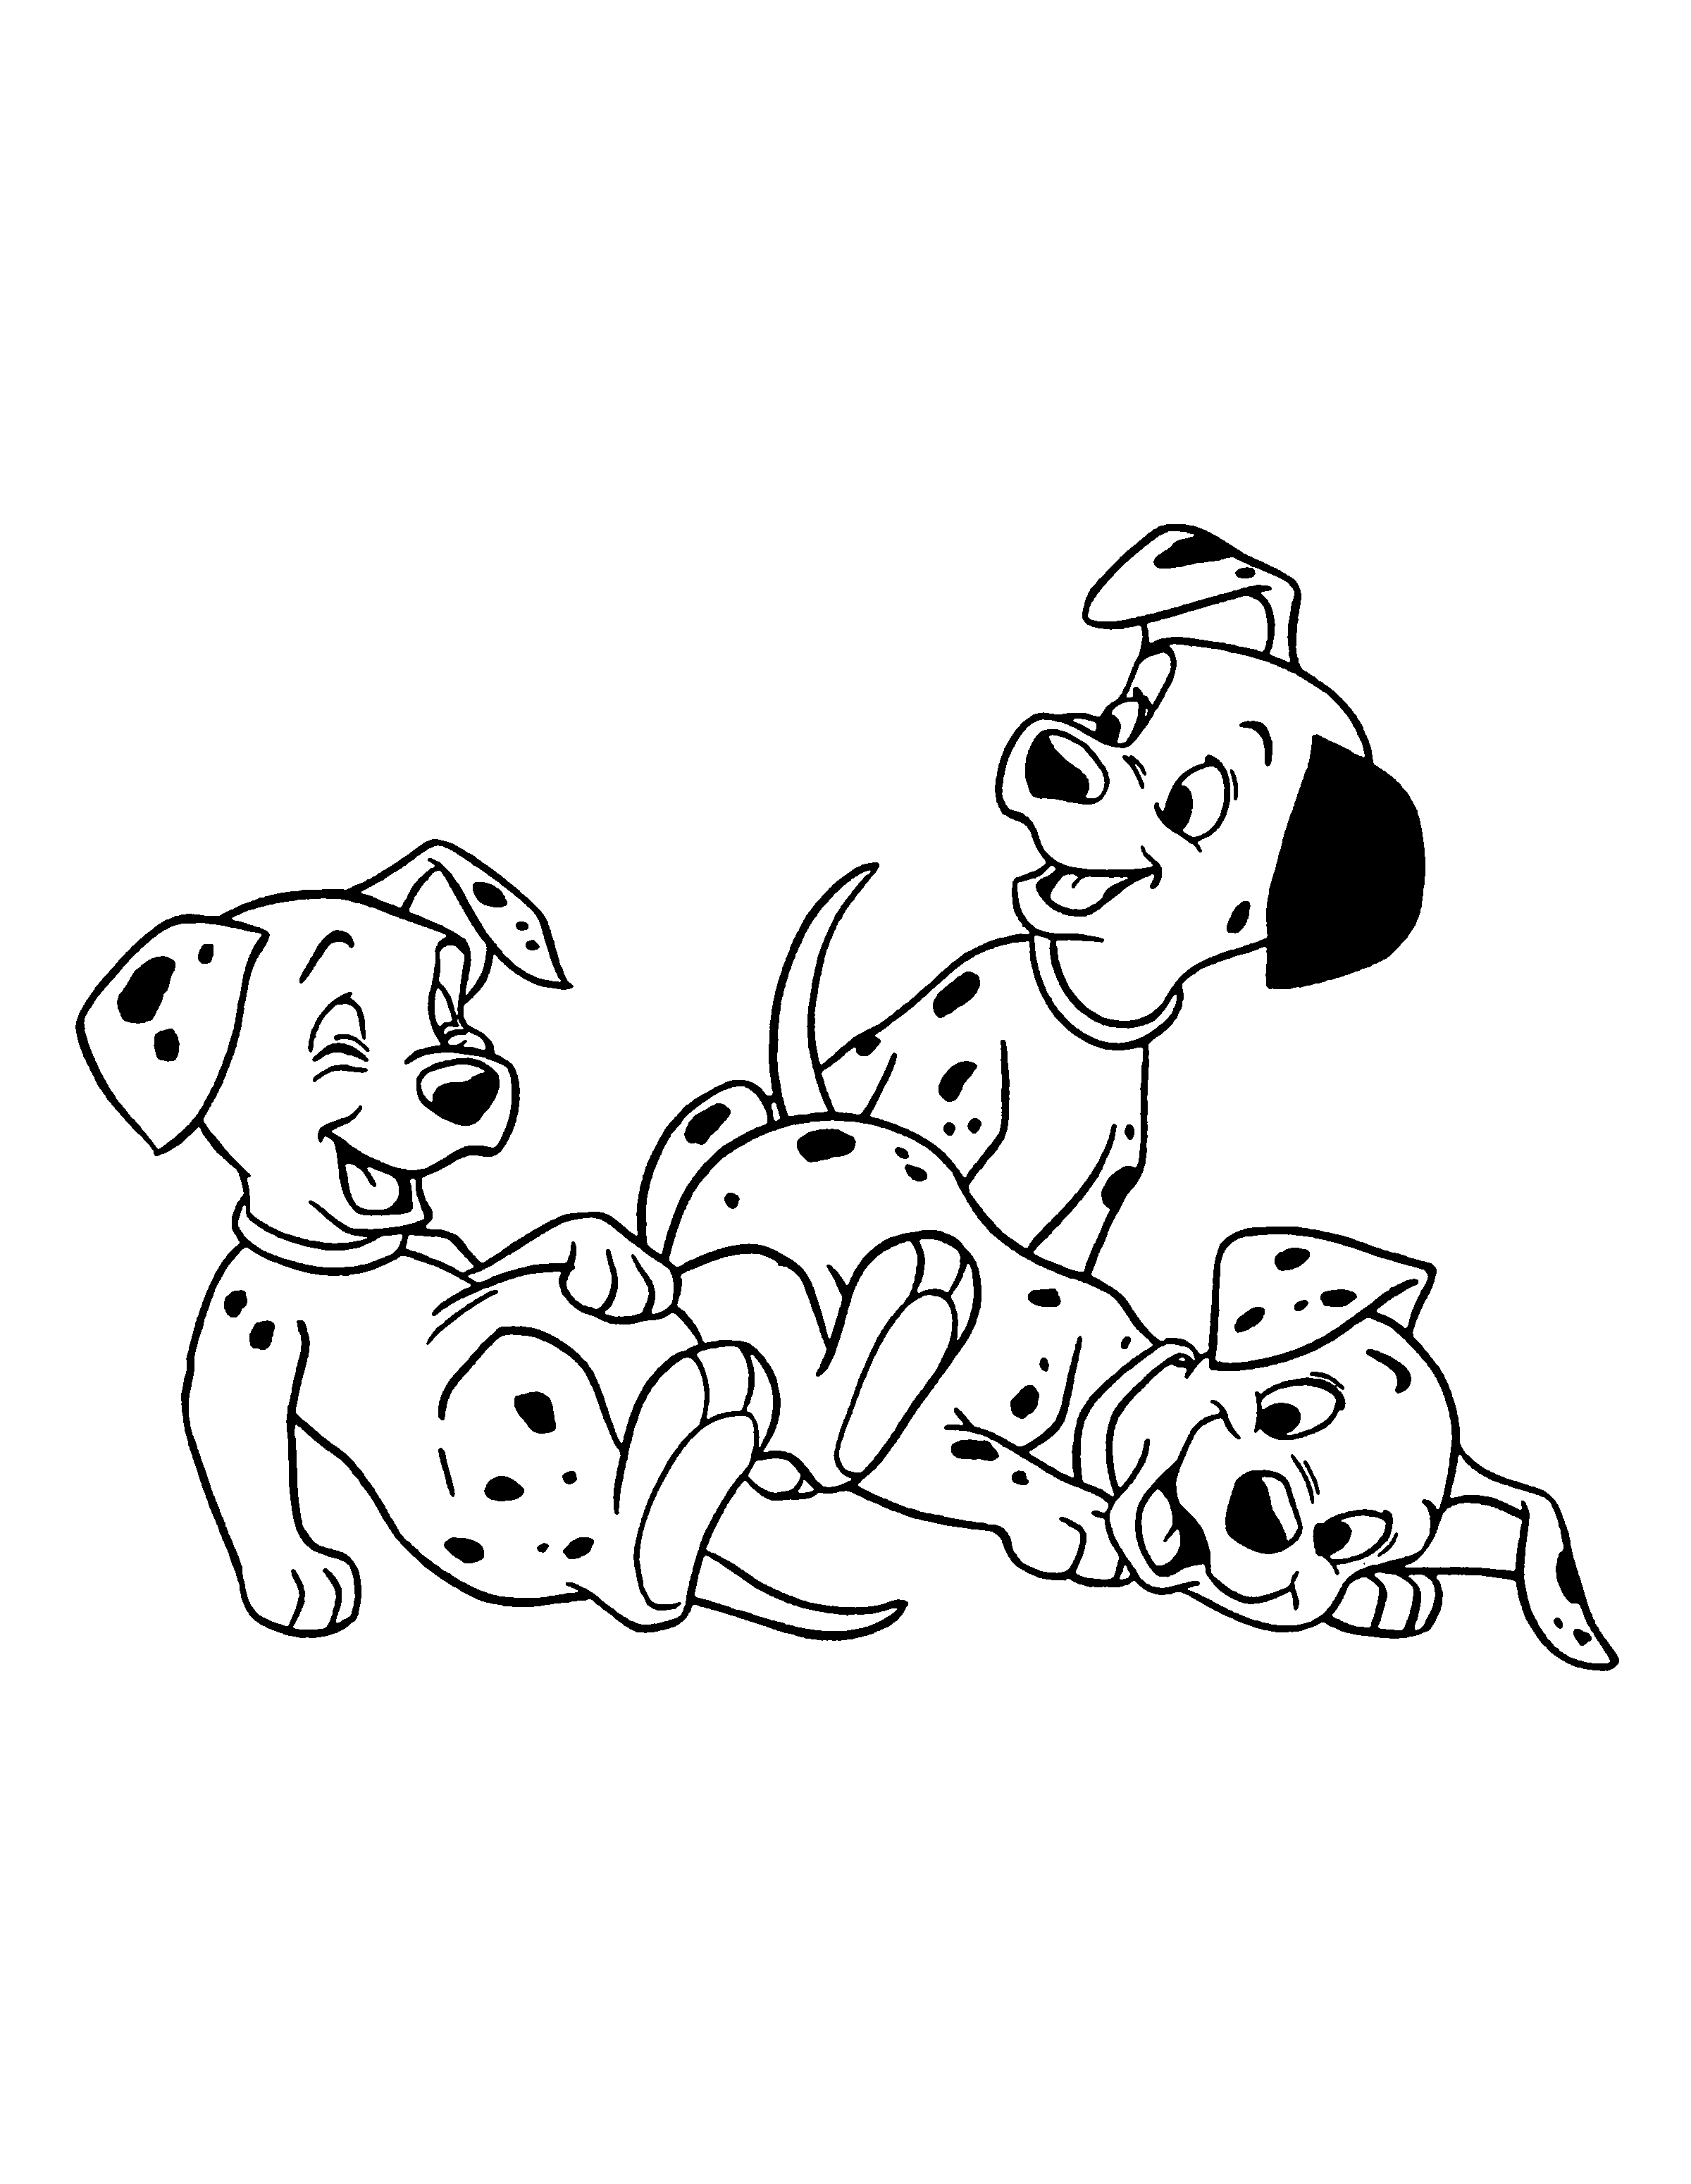 Dalmatian Coloring Page Coloring Home